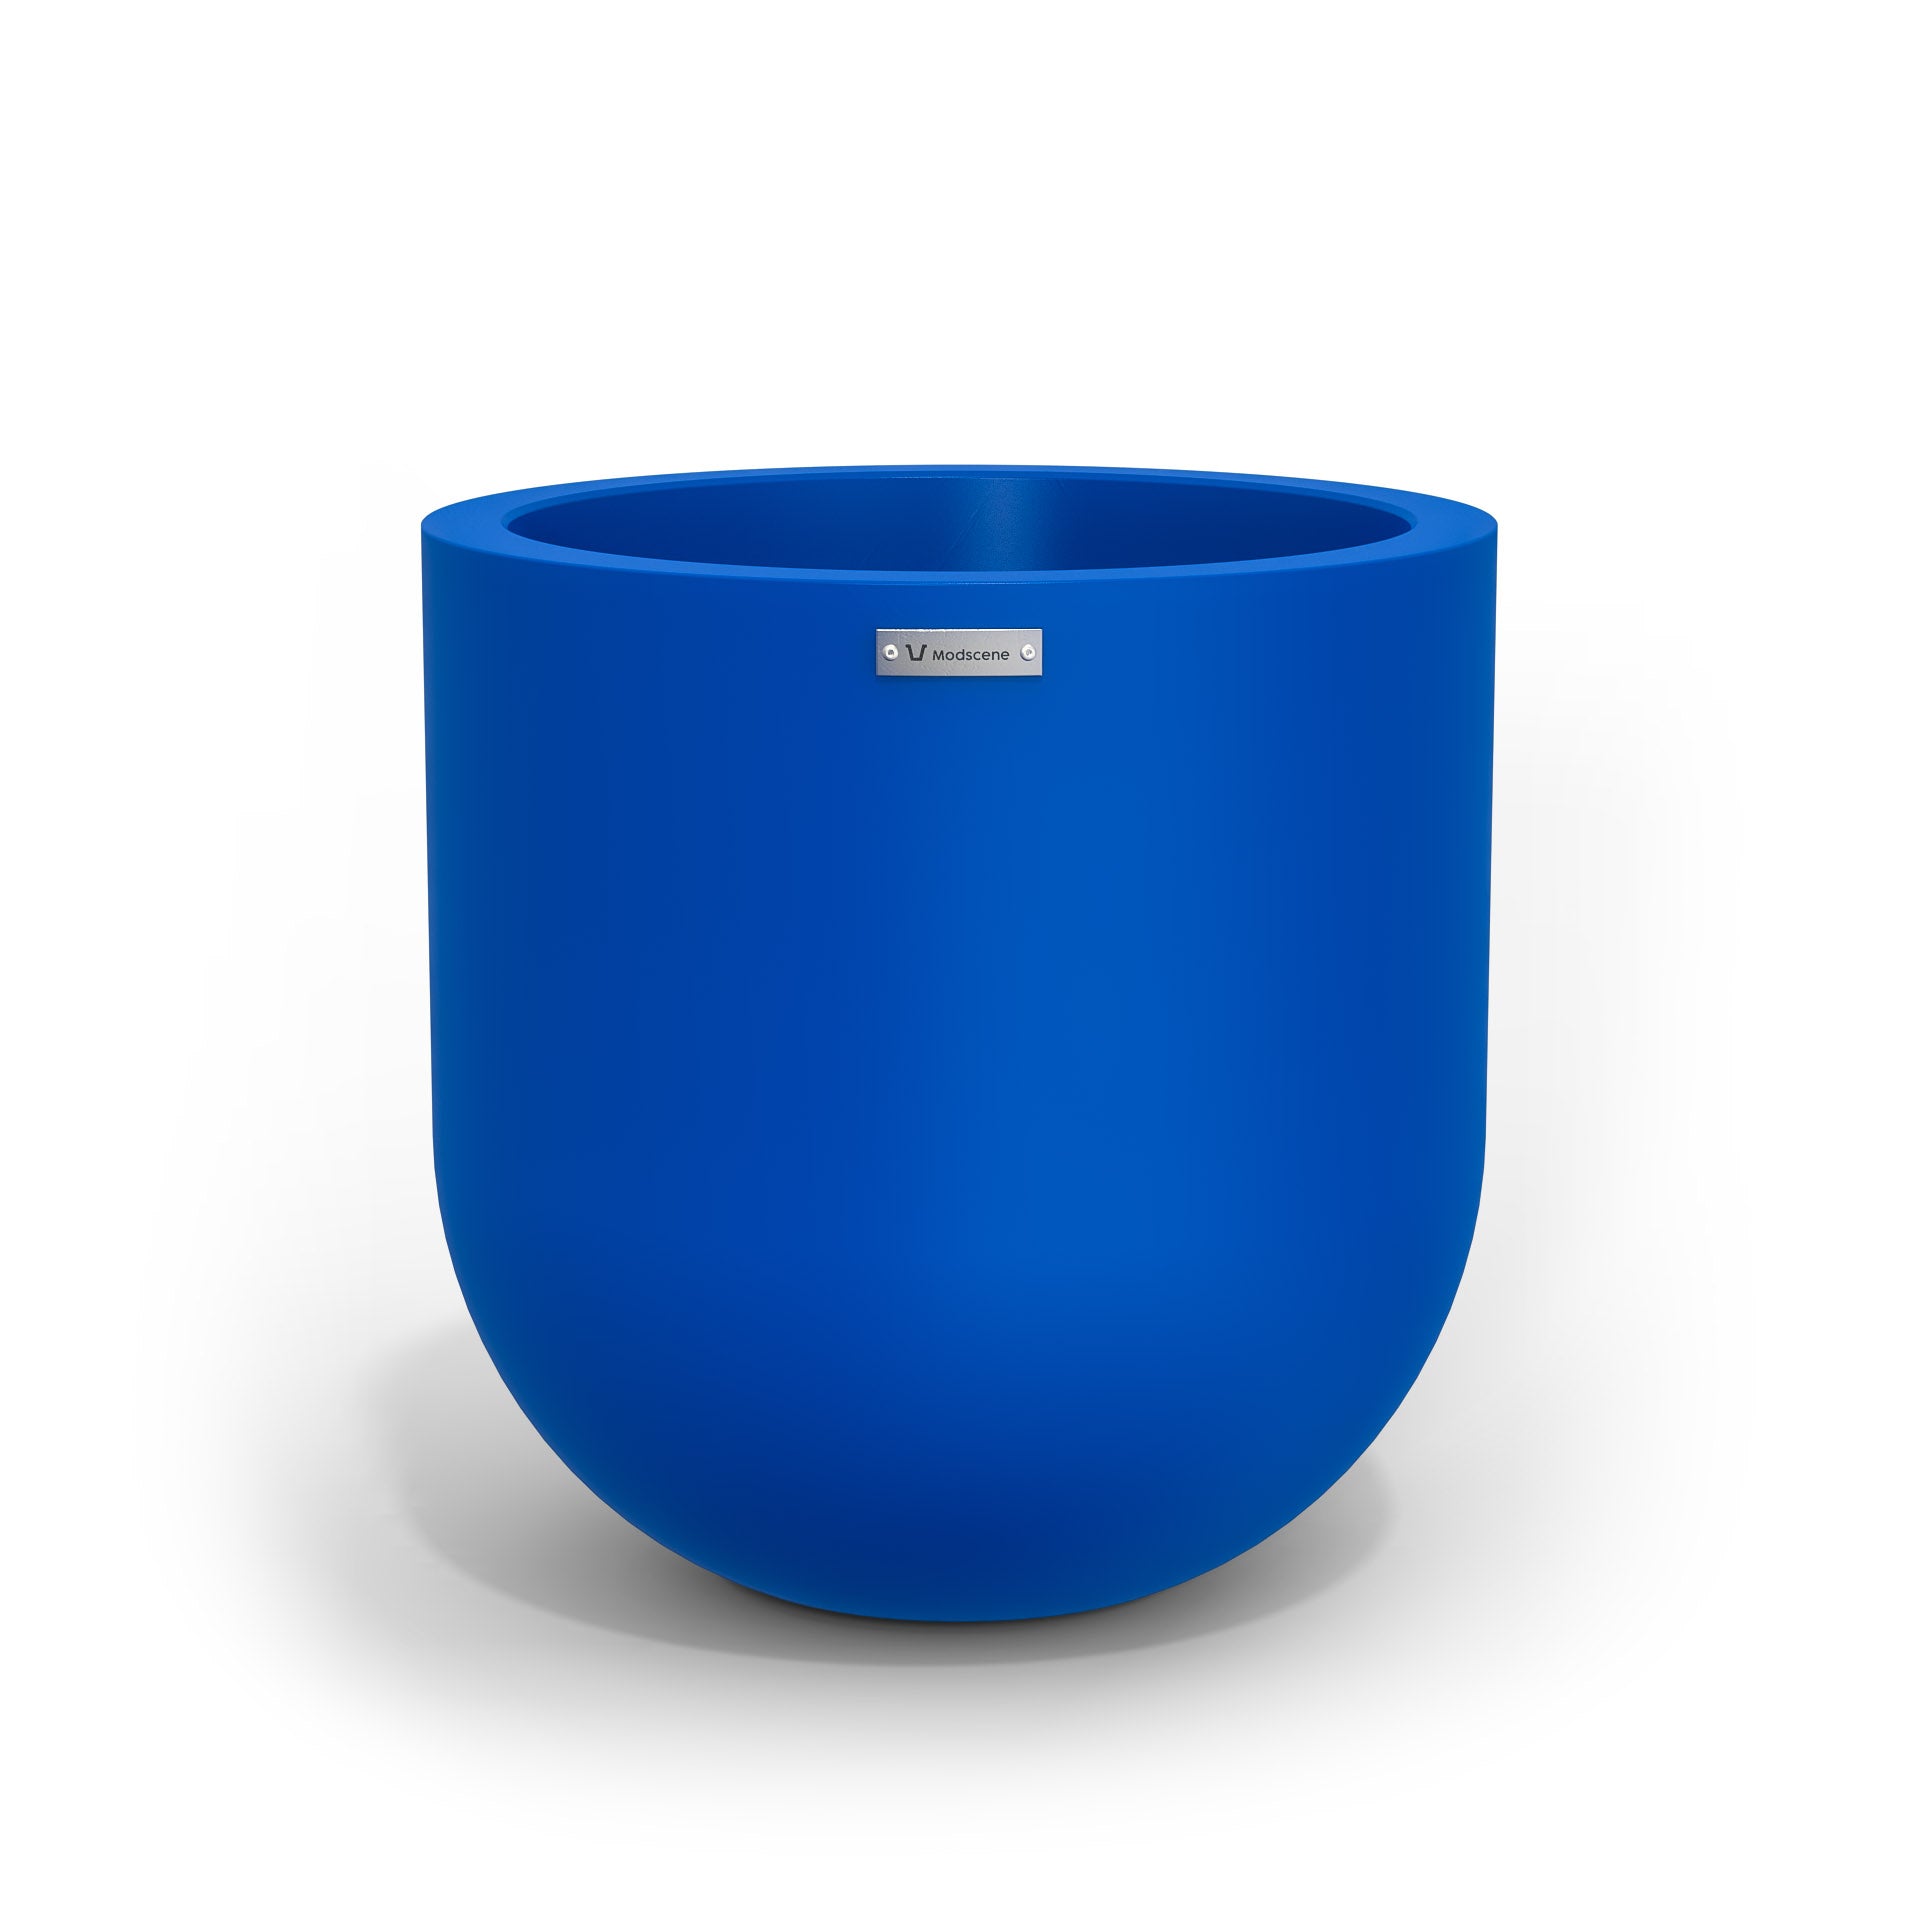 A medium sized planter pot in a deep blue colour made by Modscene.